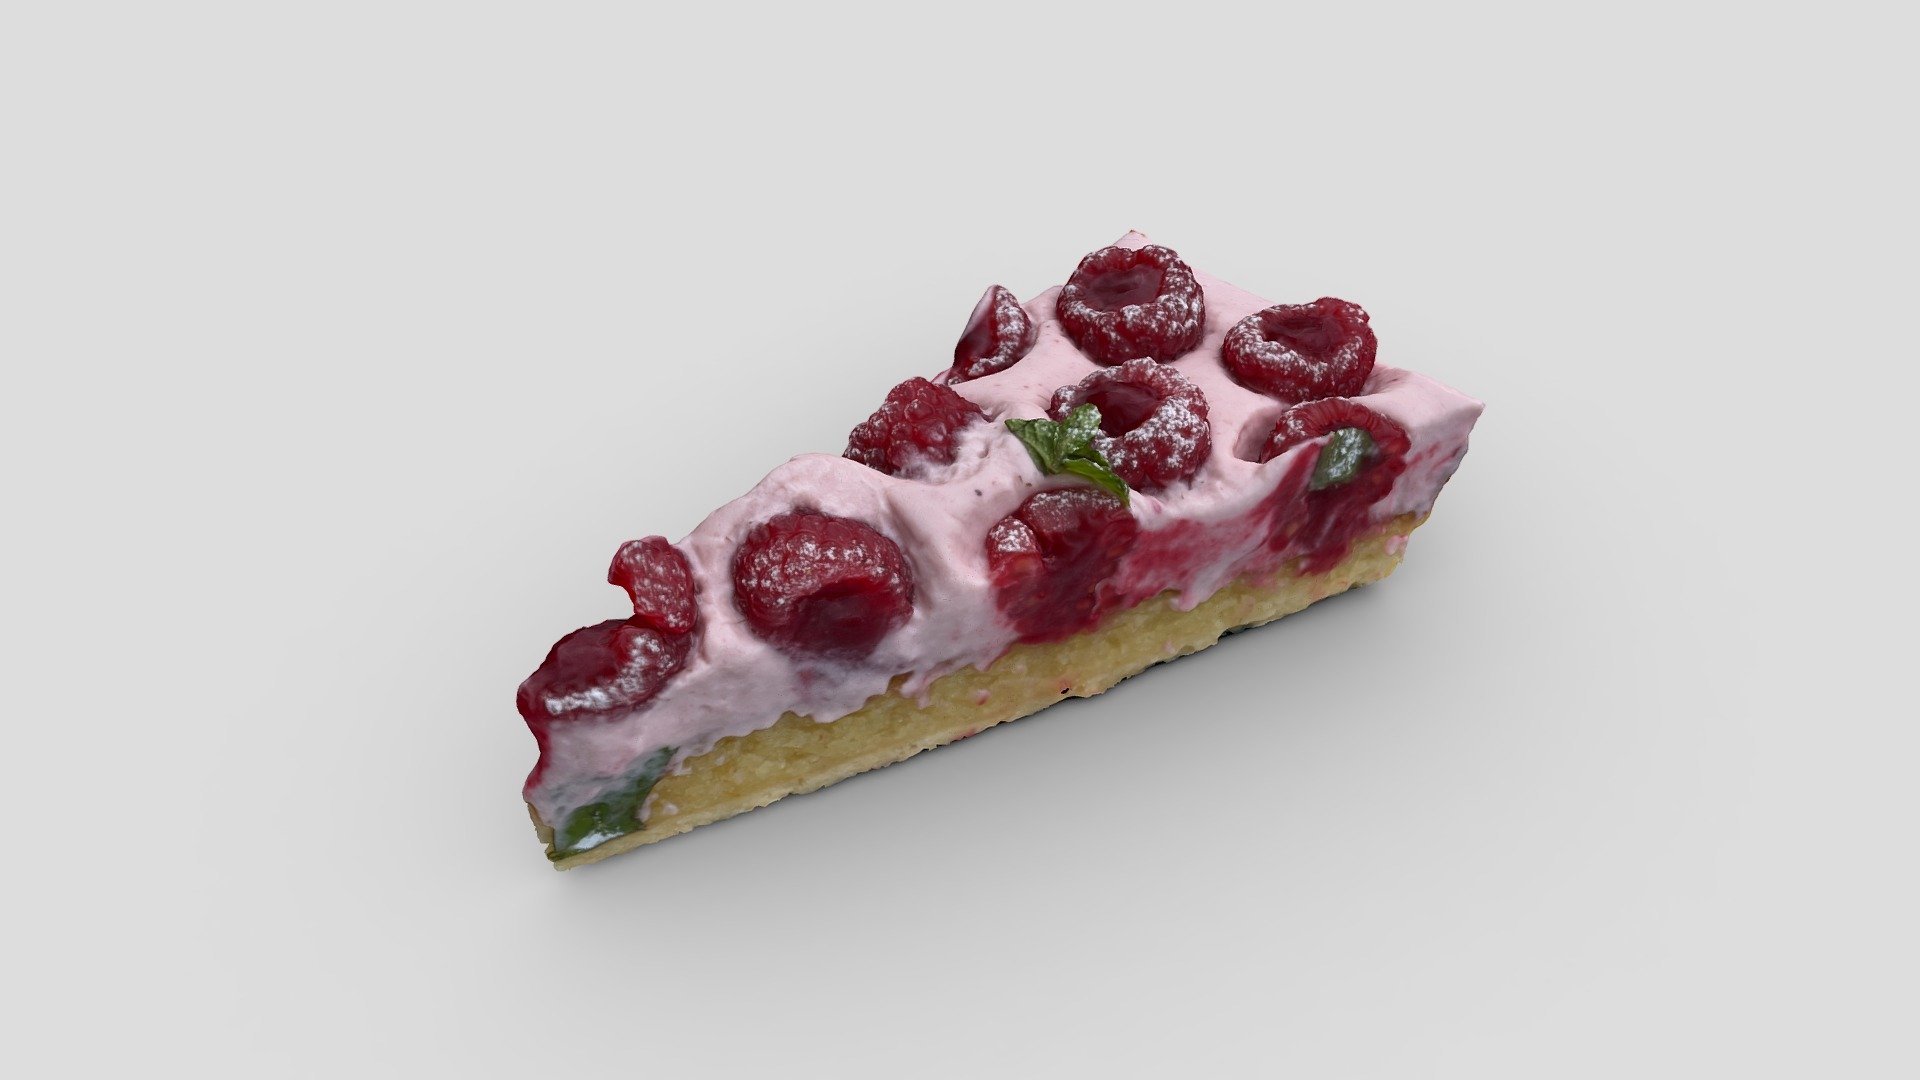 A recipe by Cyril Lignac, home made by Guillaume. A delight! Each raspberry was individually filled with coulis.

Full pie version: https://sketchfab.com/3d-models/homemade-raspberry-pie-c0165077cc8e48b7bee09813d3152ebd

Captured with RealityScan - Slice of raspberry pie - Download Free 3D model by alban 3d model